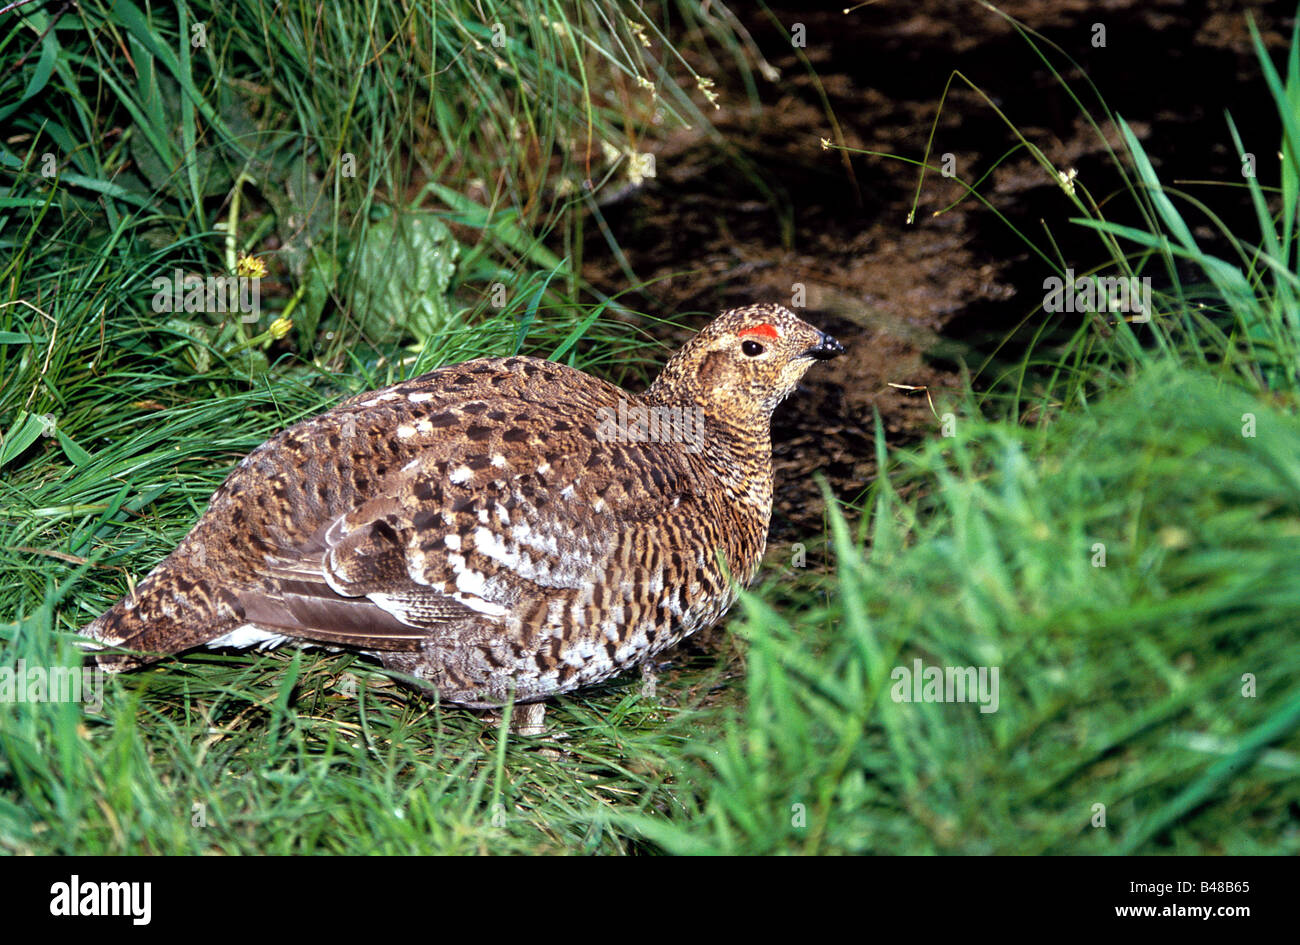 Zoologie/Tiere, Vogel/Vogel, Tetraonidae, Birkhuhn (Tetrao tetrix), weibliche Tier in Gras, Verbreitung: Europa, Asien, Additional-Rights - Clearance-Info - Not-Available Stockfoto